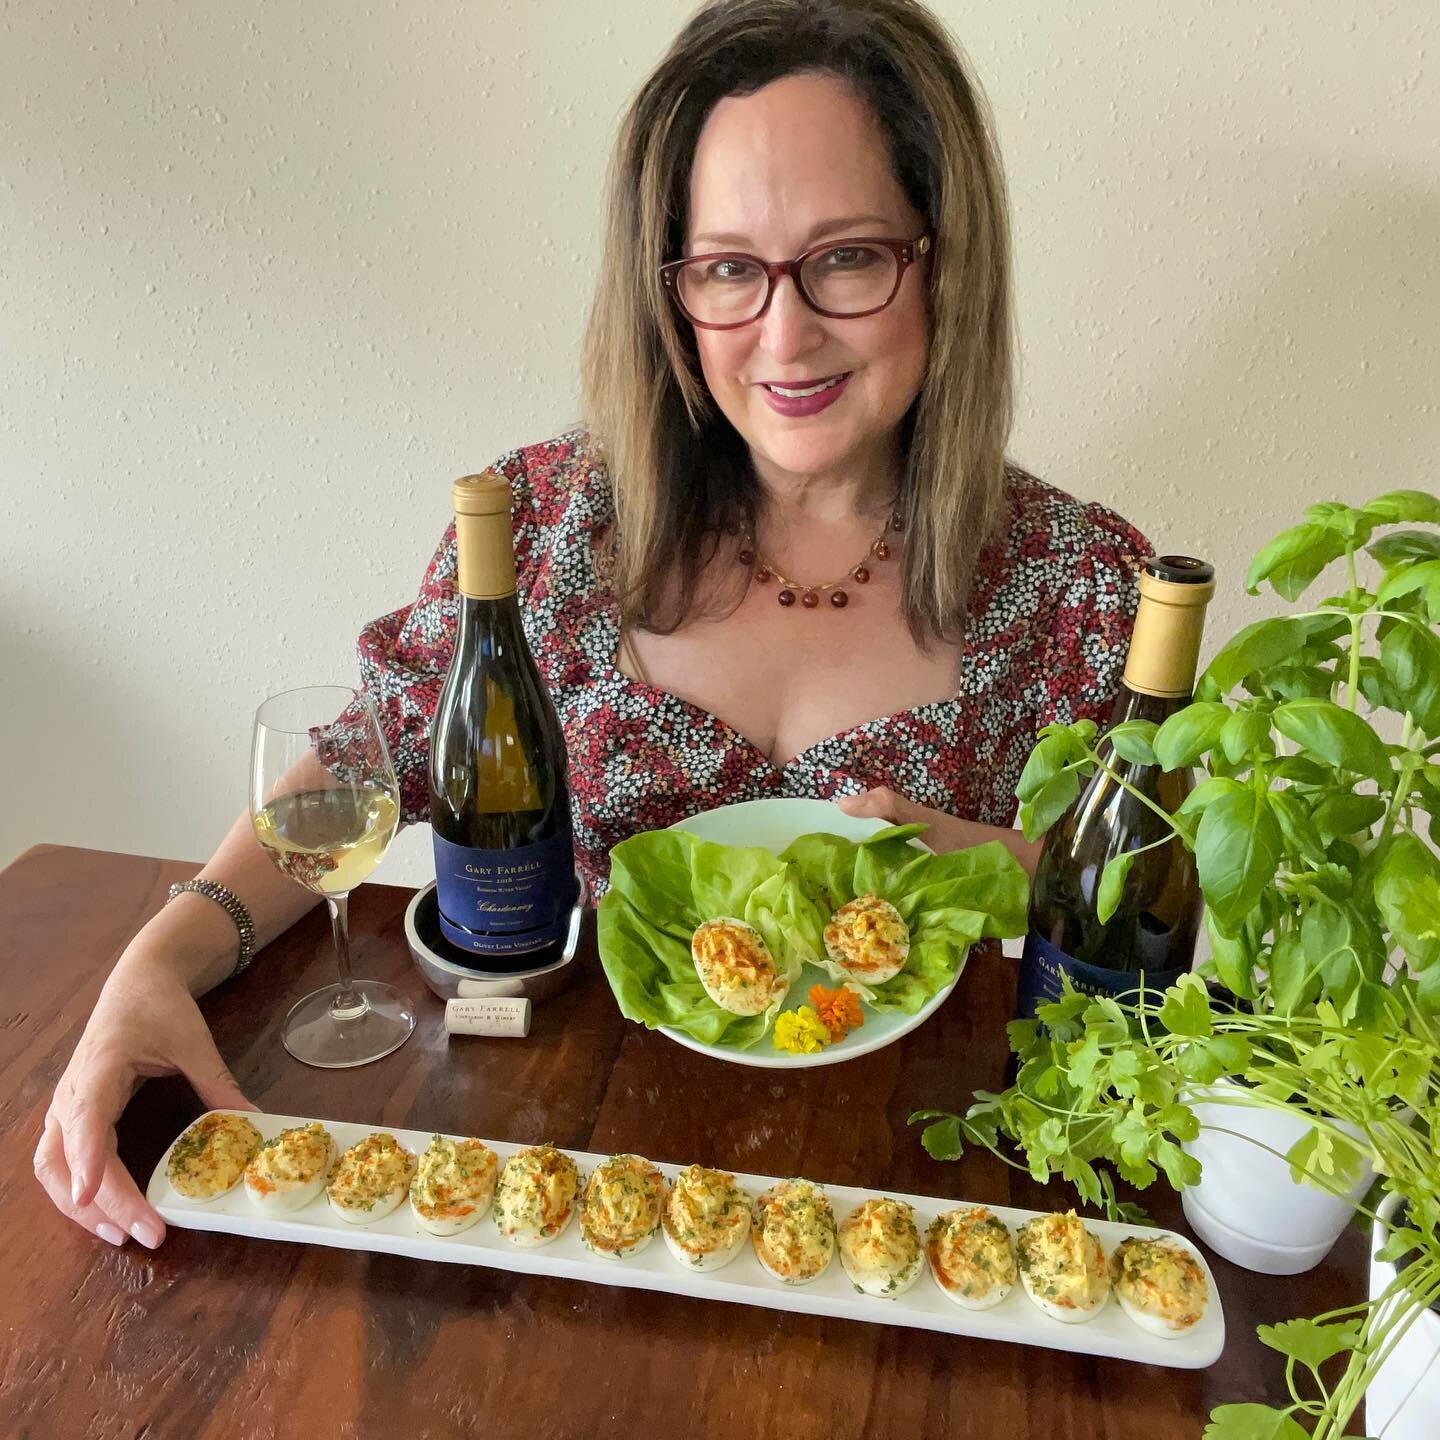 There&rsquo;s no Easter egg hunt here peeps&hellip;
 
🐣Pass me the deviled eggs and the Gary Farrell @garyfarrellwinery Chardonnay please! 

🌼Happy Easter!! 
.
.
.
.
.
.
.
.
.
.
#garyfarellwinery #chardonnay #chardonnayallday #russianrivervalley #s